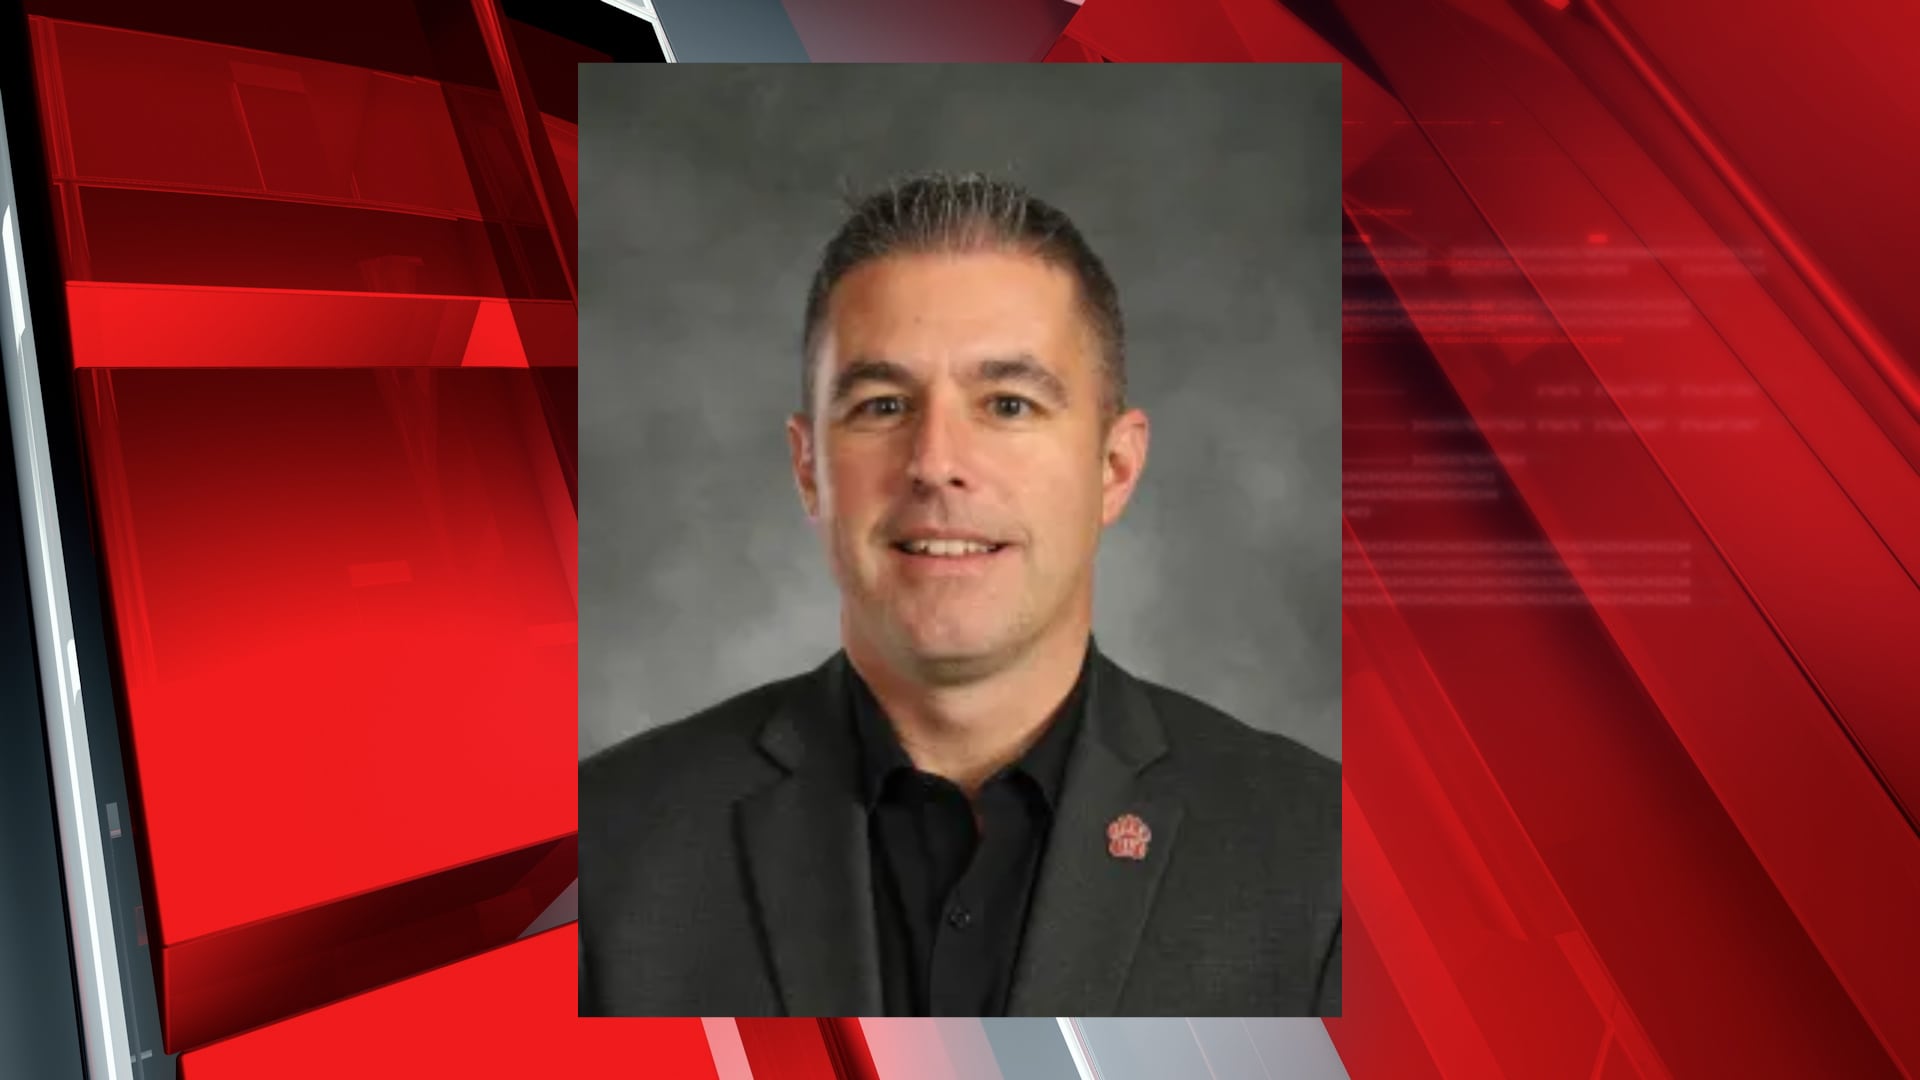 wadsworth city schools superintendent given ‘last chance’